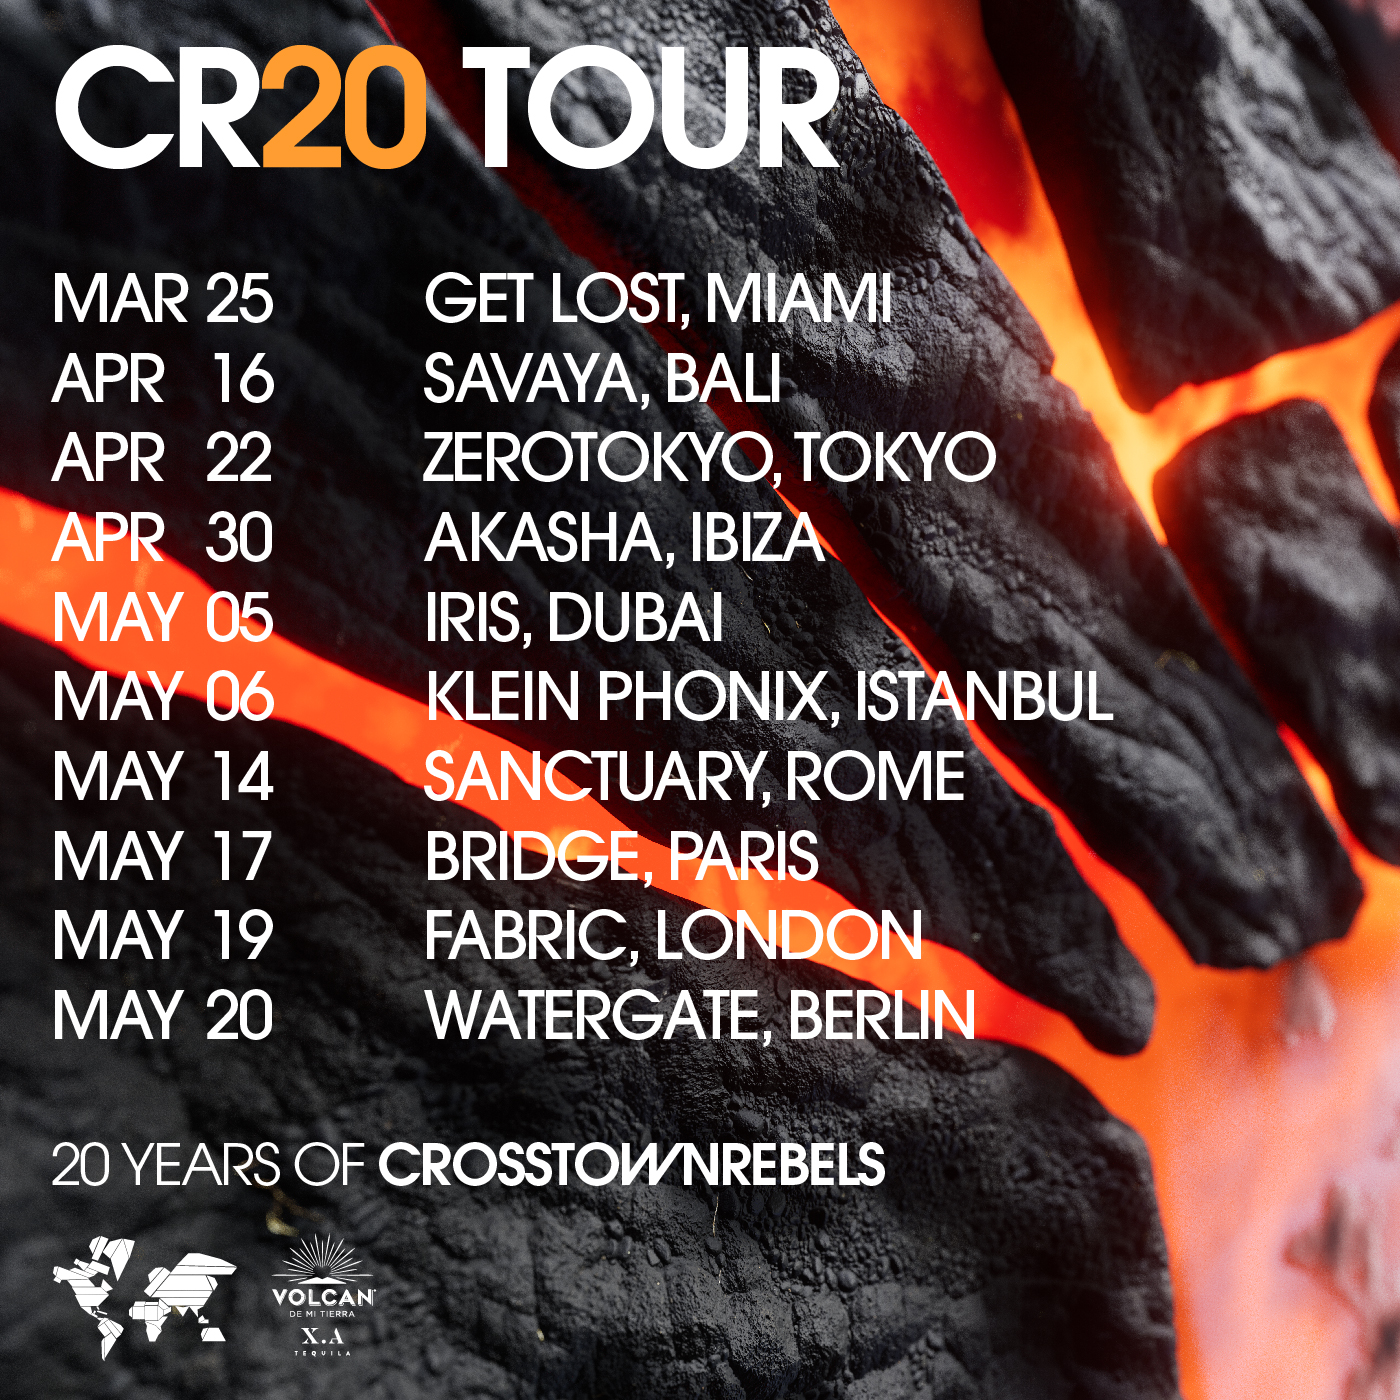 Crosstown Rebels’ 20th Anniversary Tour Takes Over 10 Party Cities with Top DJs and Epic Lineup